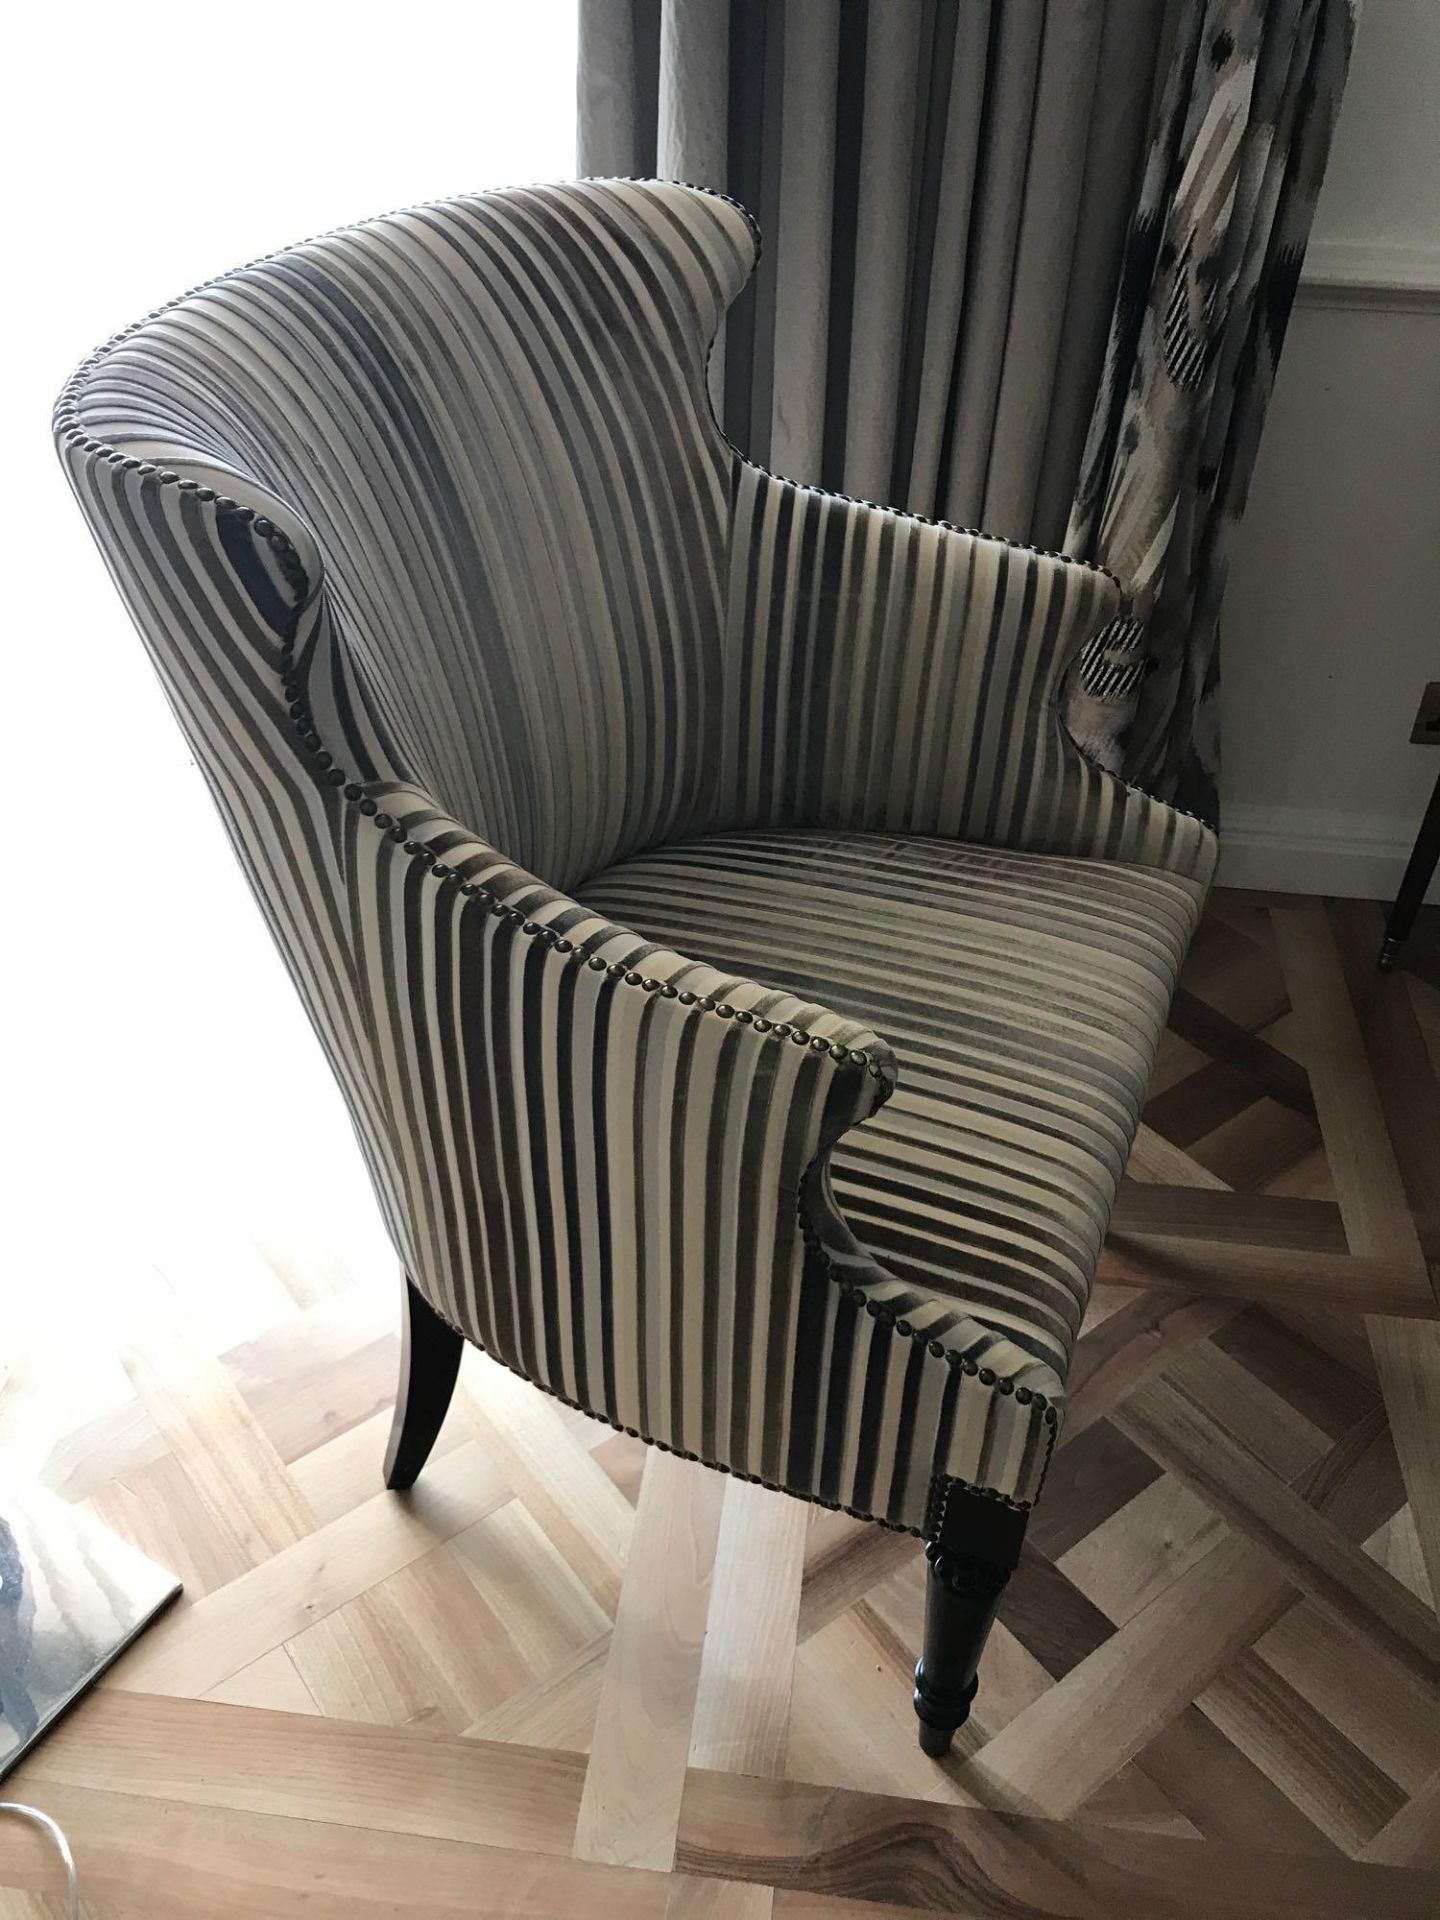 Accent Chair In Upholstered Striped Fabric 65 x 49 x 84cm Room 604 - Image 2 of 2